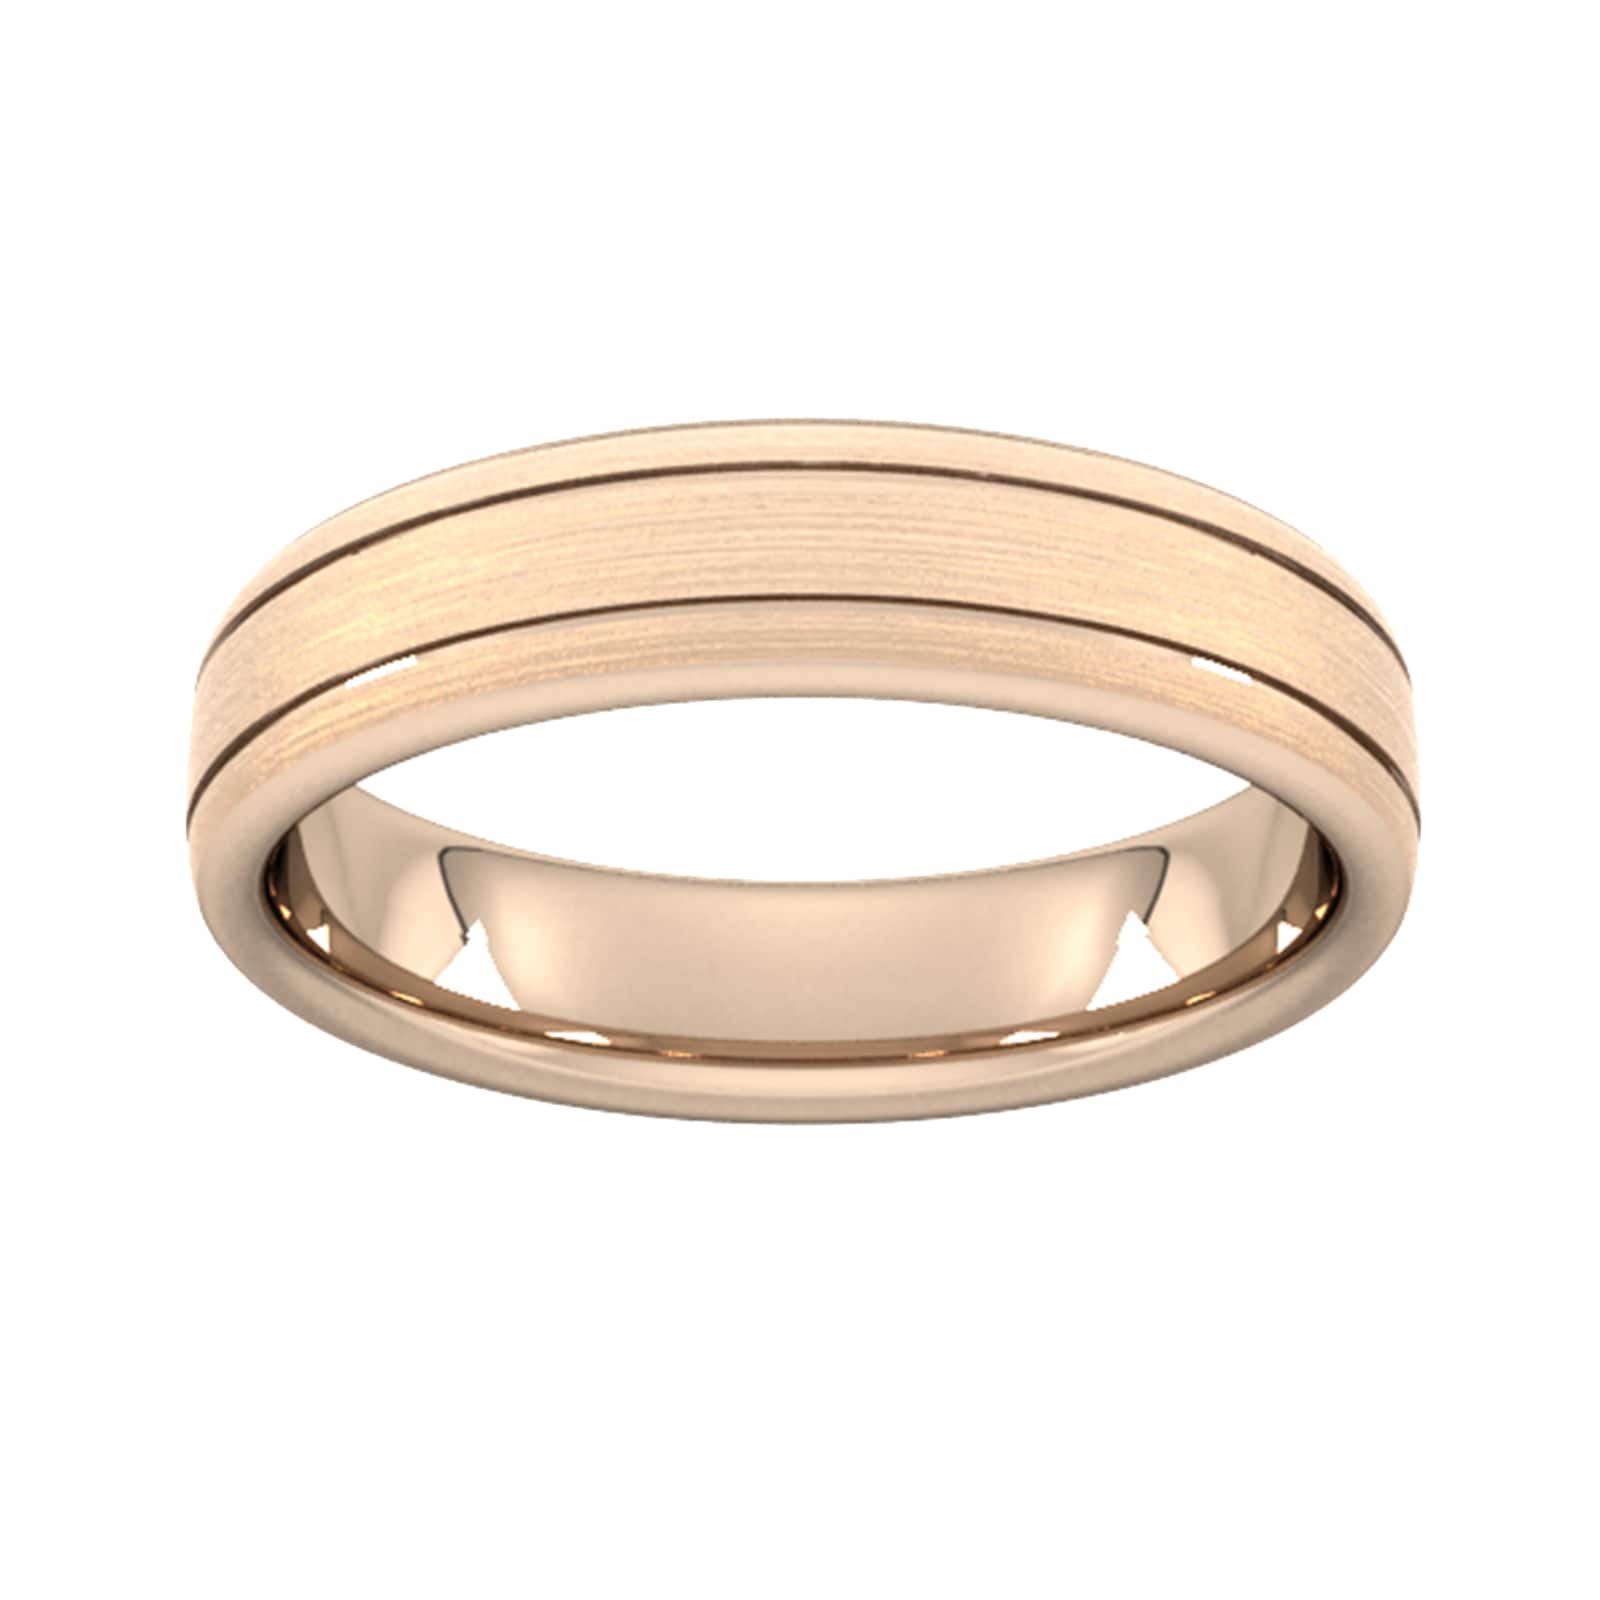 5mm D Shape Standard Matt Finish With Double Grooves Wedding Ring In 9 Carat Rose Gold - Ring Size T